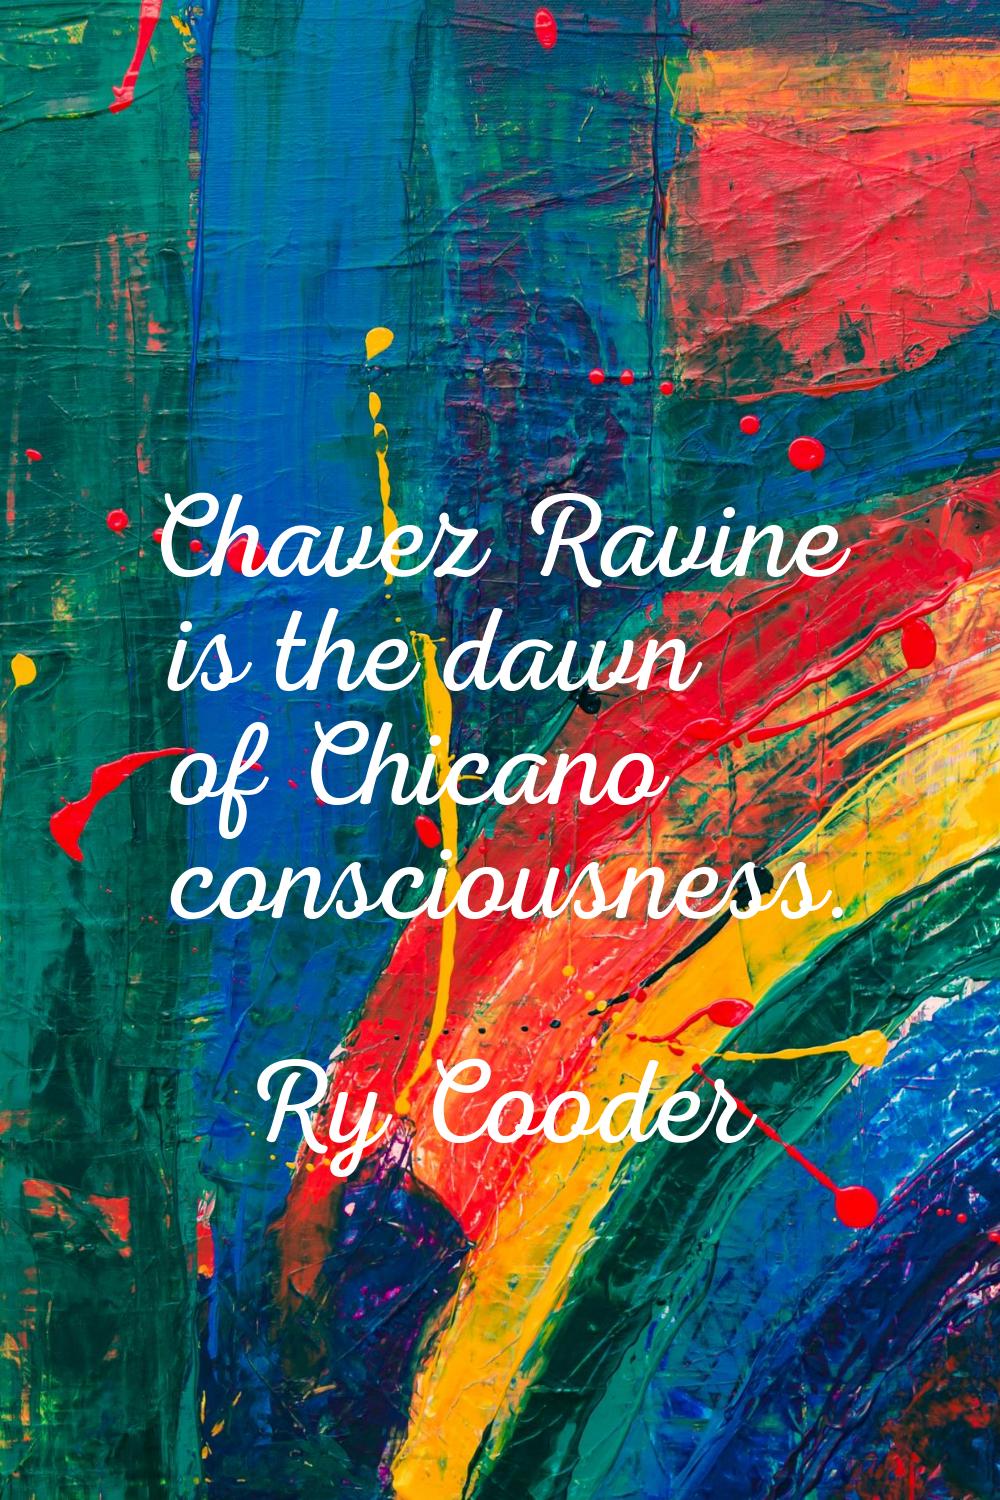 Chavez Ravine is the dawn of Chicano consciousness.